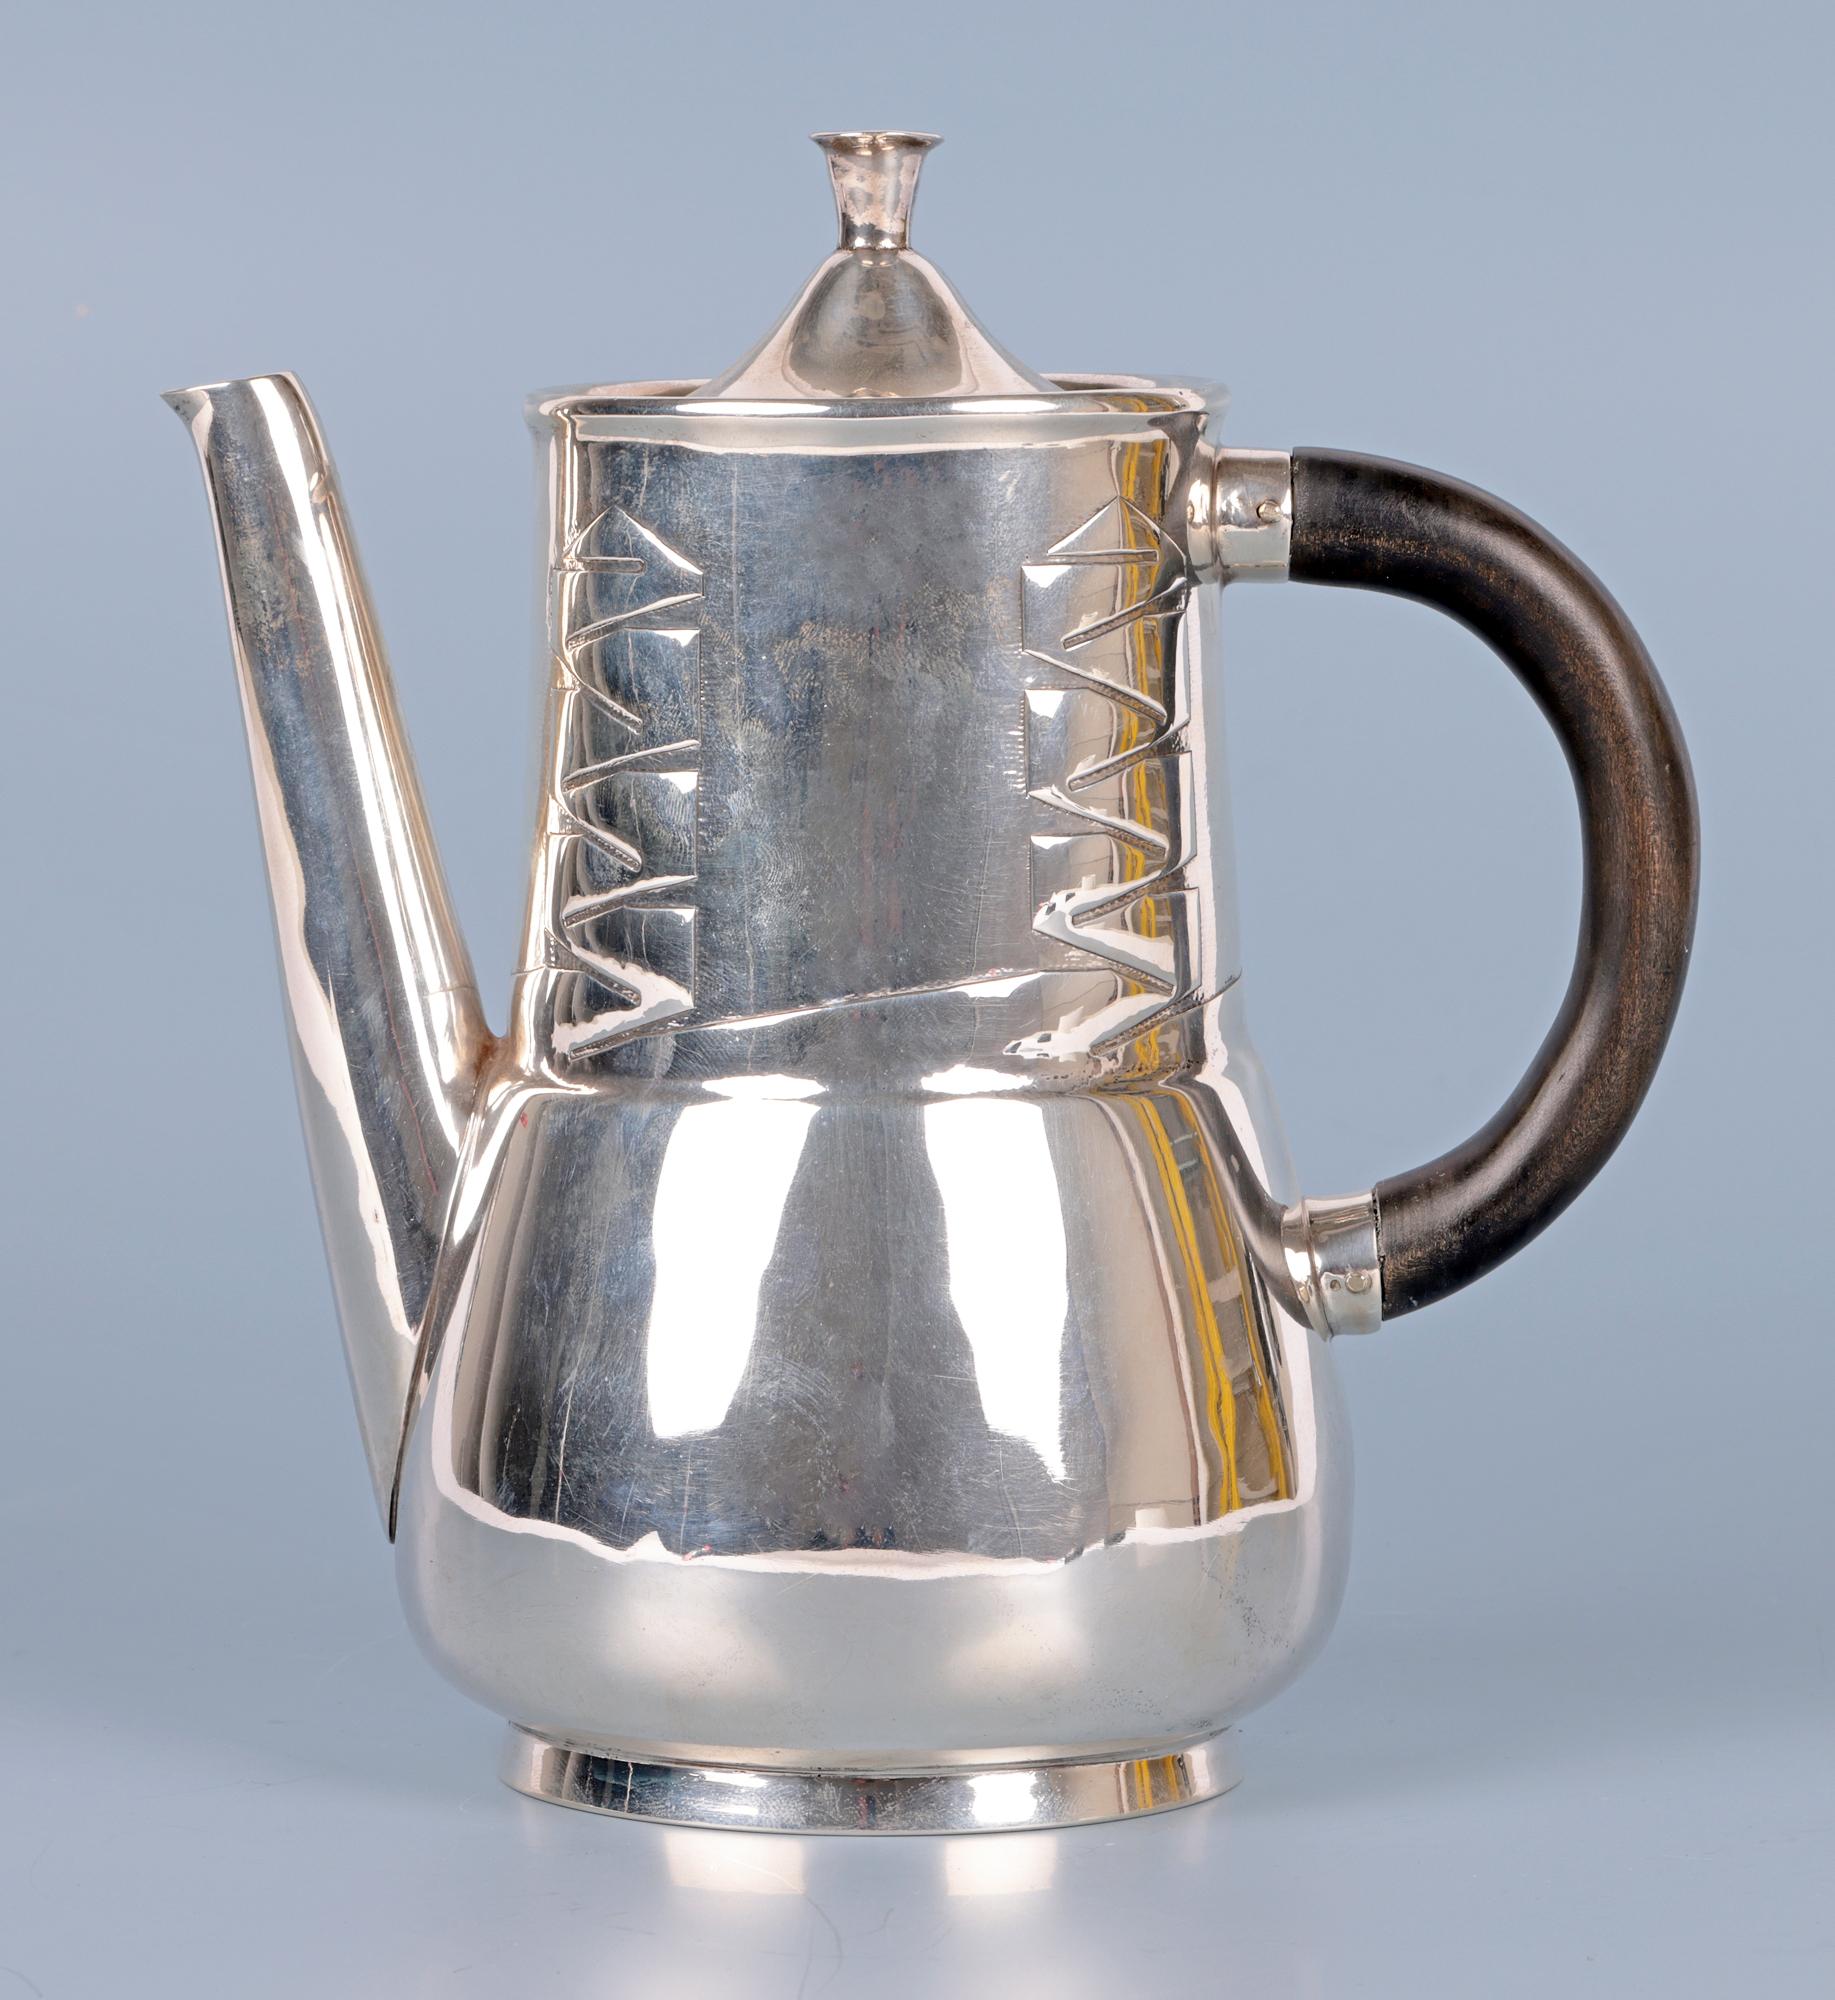  Archibald Knox Liberty & Co Silver Art Nouveau Silver Teapot In Good Condition For Sale In Bishop's Stortford, Hertfordshire